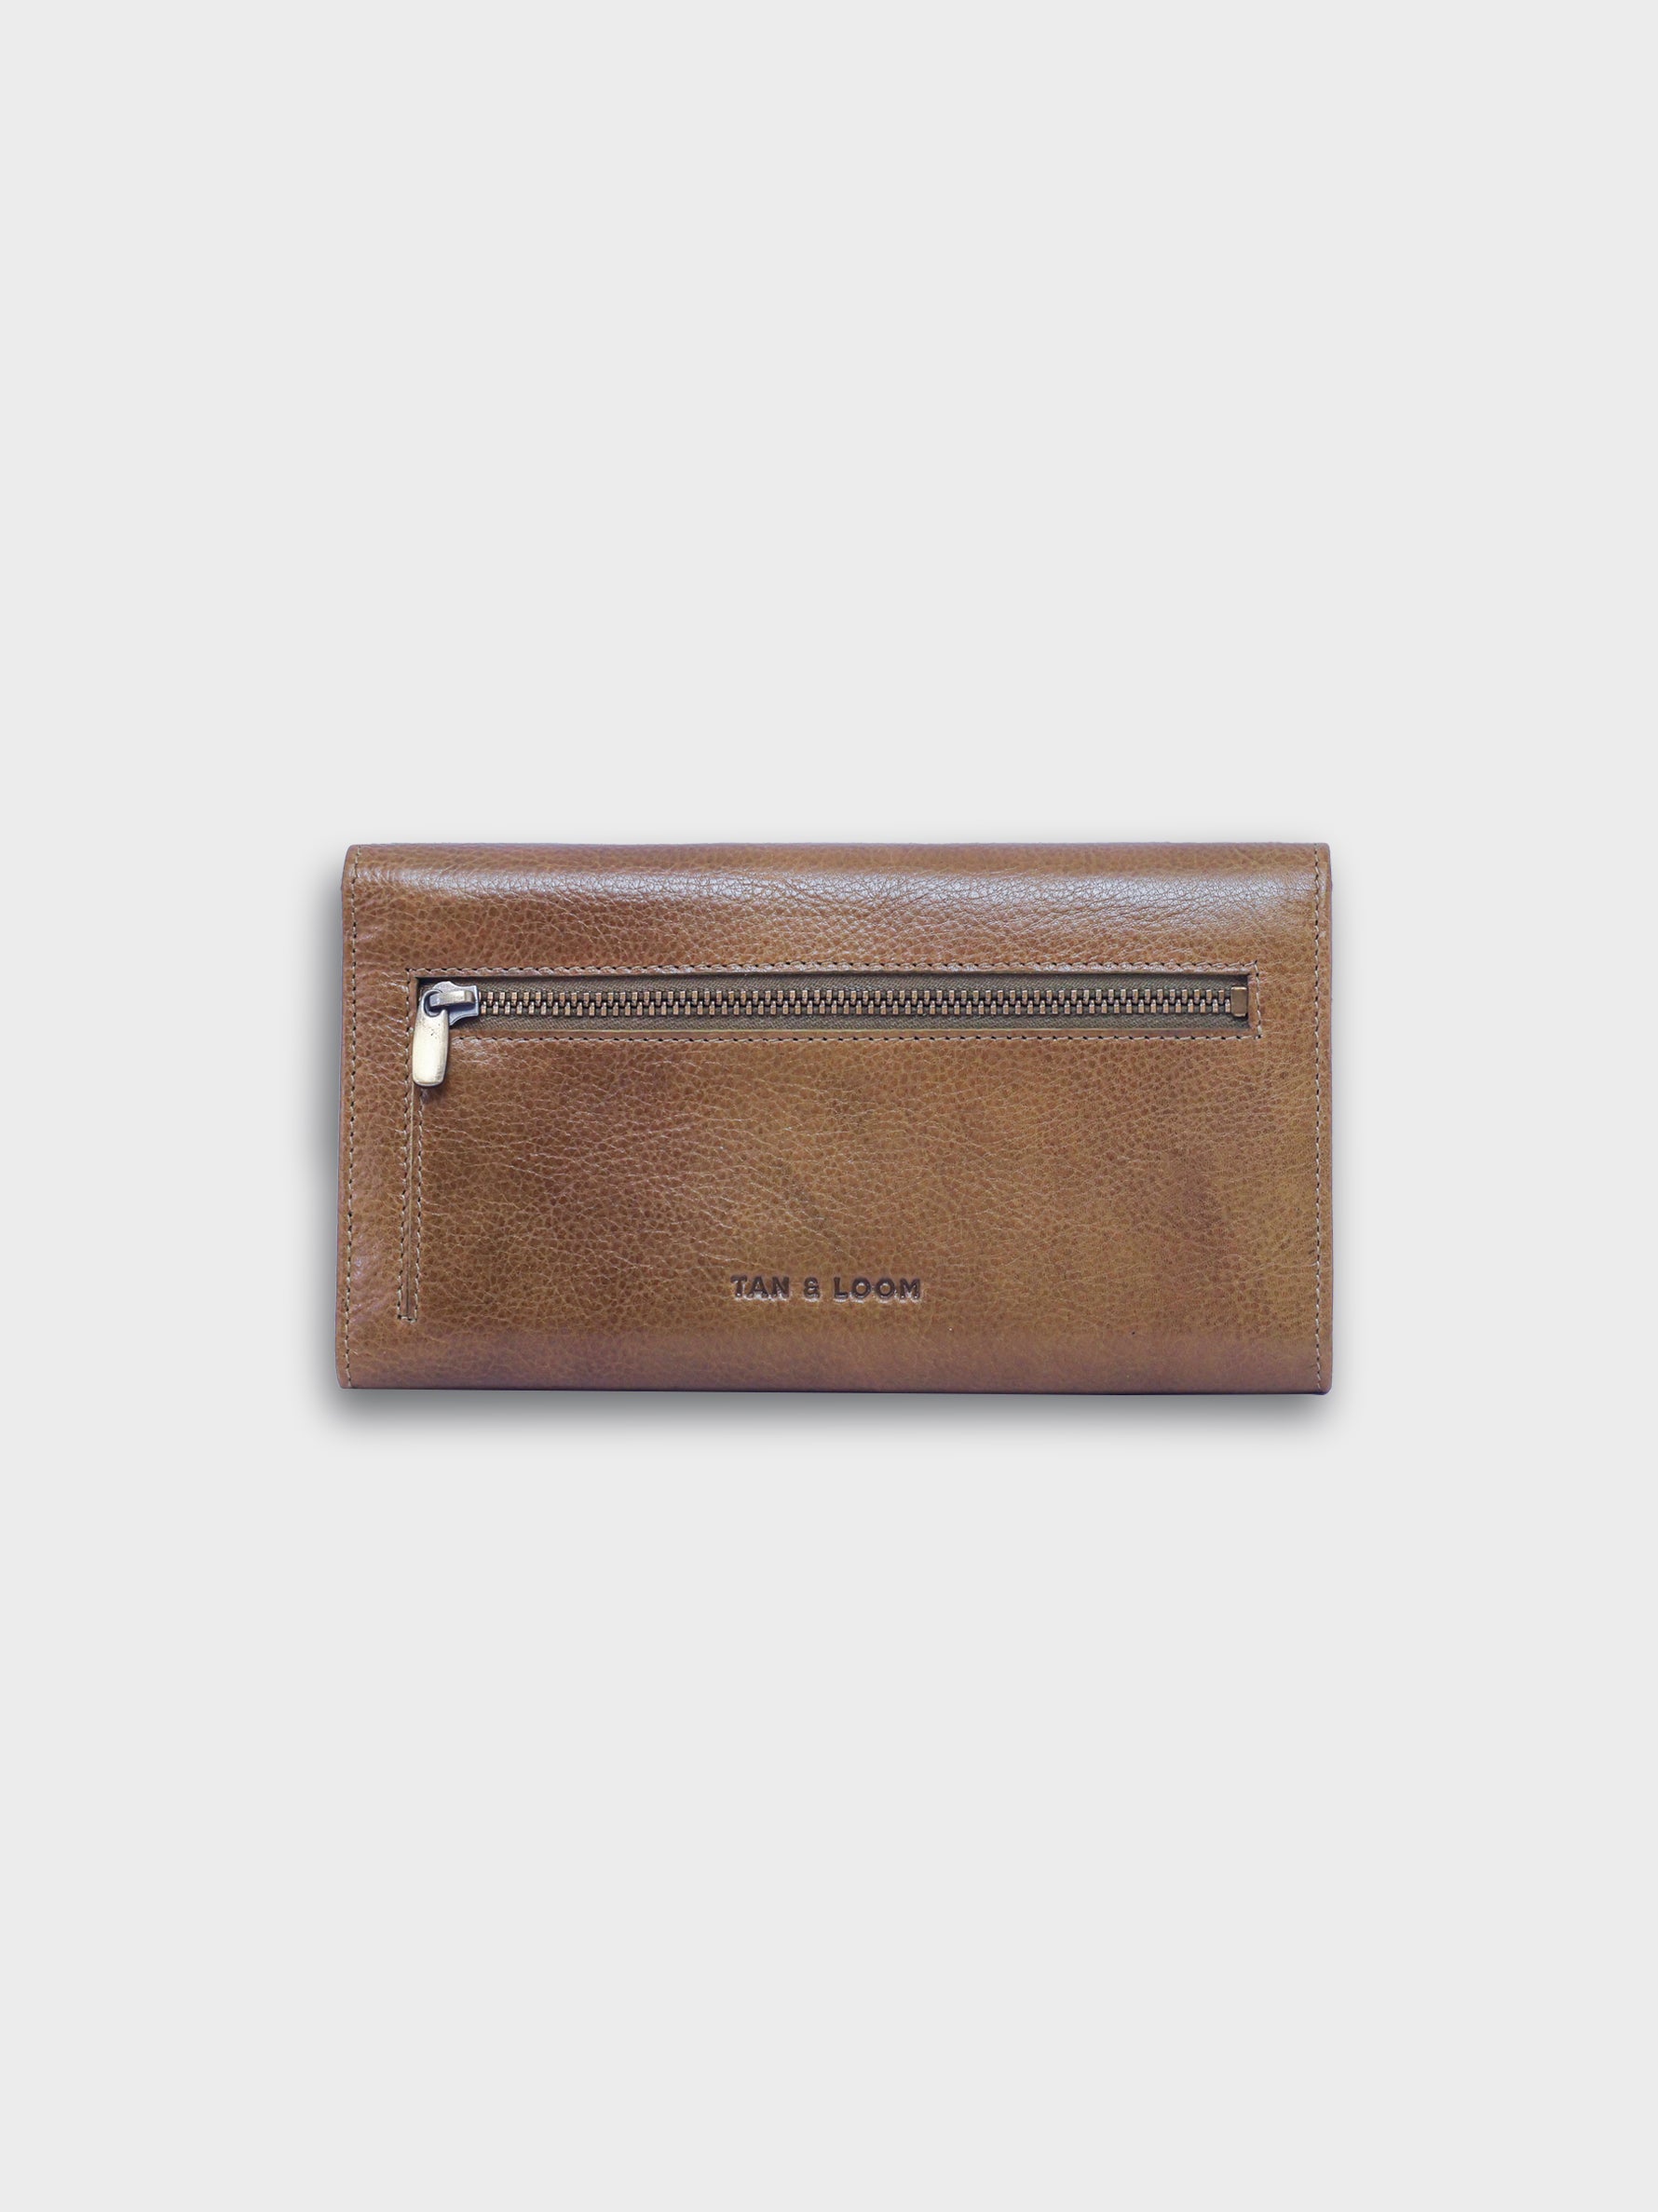 Handcrafted Genuine Vegetable Tanned Leather Envelope Wallet Olive Green for Women Tan & Loom